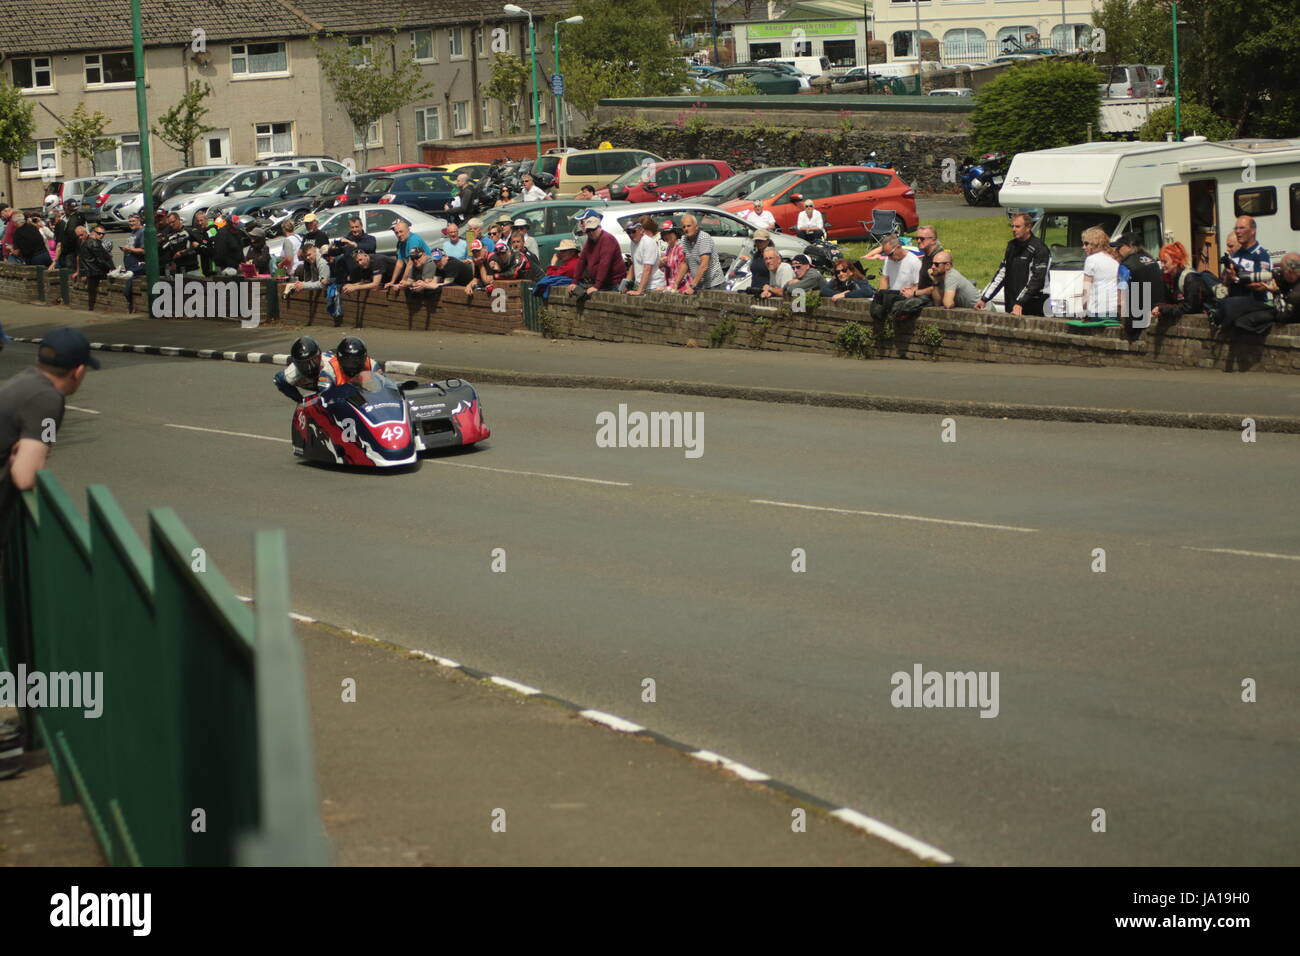 Isle of Man TT Races, Sidecar Qualifying Practice Race, Saturday 3 June 2017. Sidecar qualifying session.  Number 49, Gary Gibson and Daryl Gibson on their 600cc LCR Suzuki of the GDM Logistics team from Beverley, uk. Credit: Eclectic Art and Photography/Alamy Live News. Stock Photo